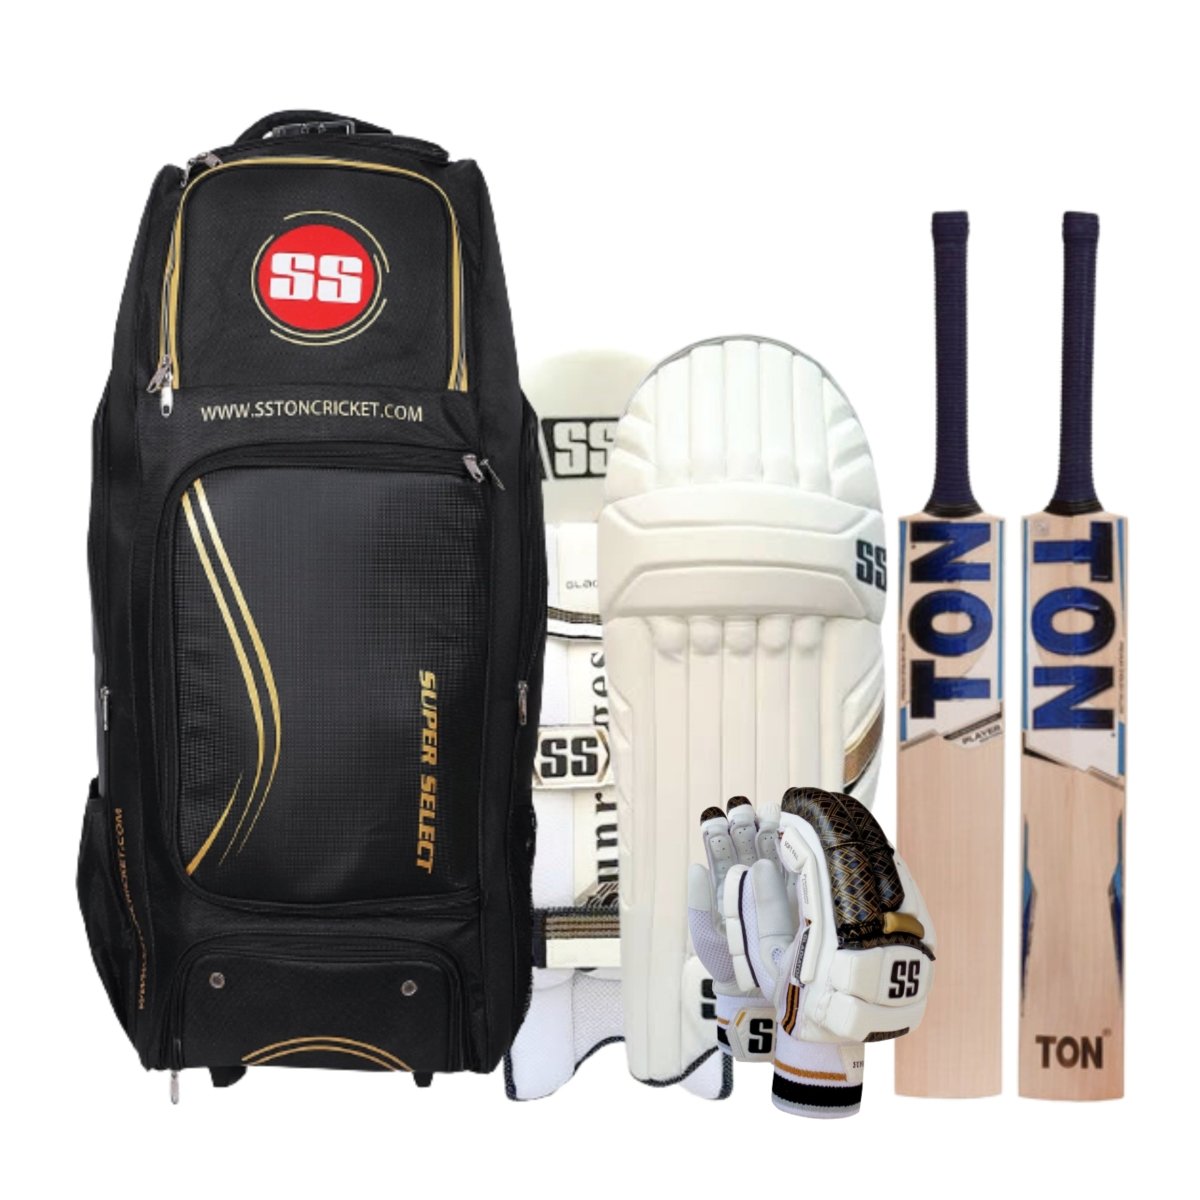 TON Player Edition English Willow Cricket Bat + SS Gladiator Batting Pads + SS Gladiator Batting Gloves + SS Super Select Duffle - Acrux Sports